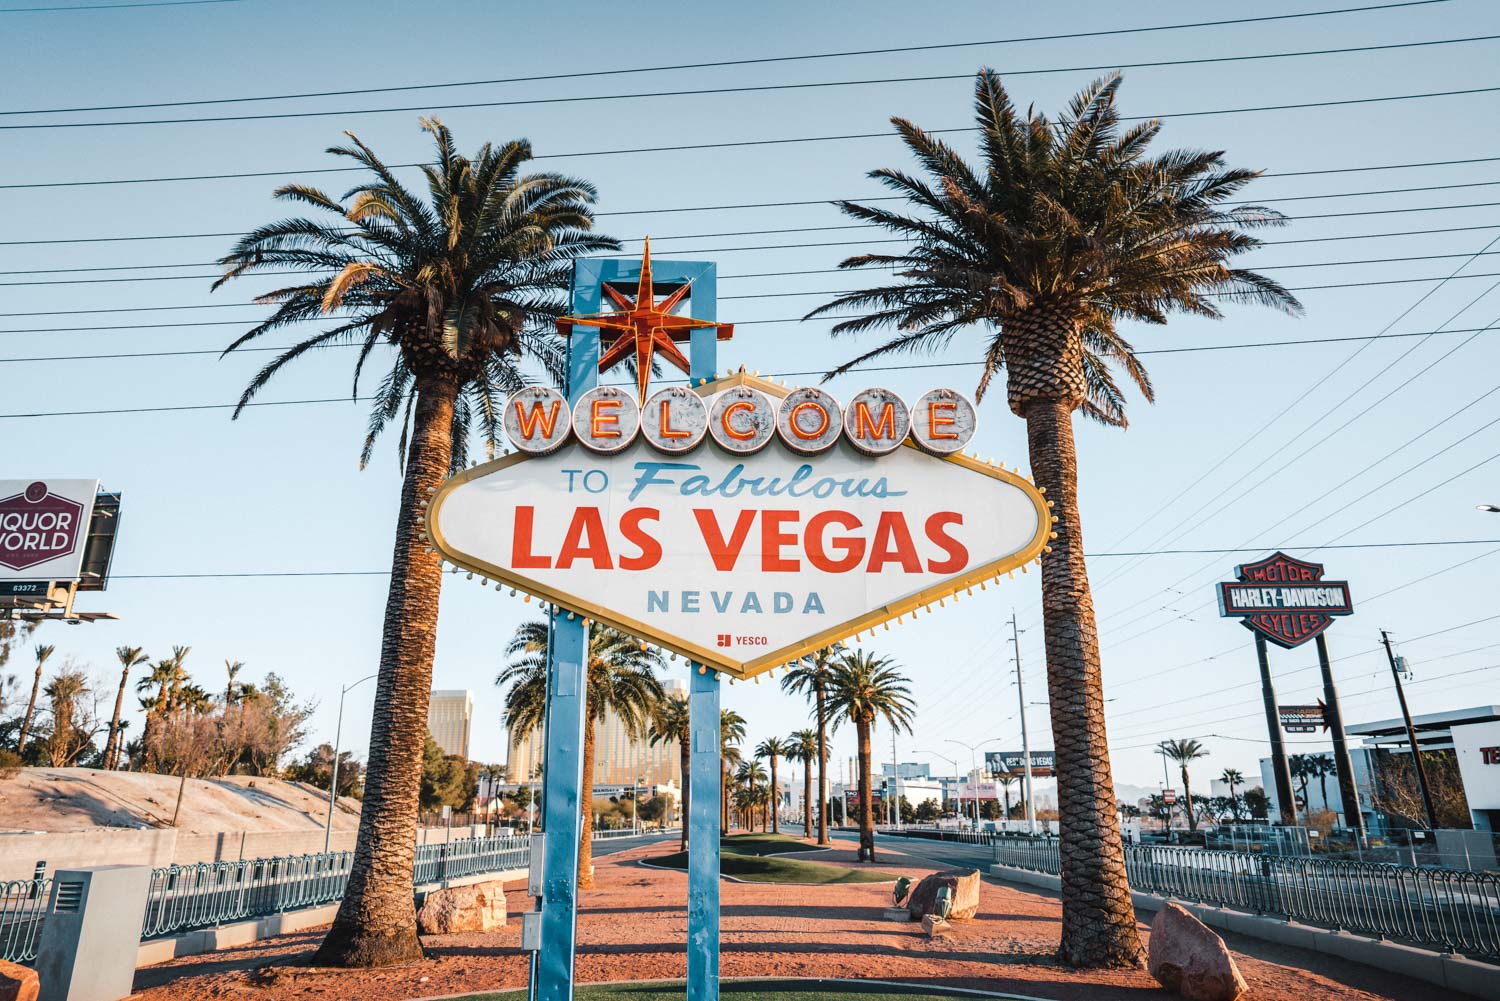 A welcome sign for las vegas is in front of palm trees - Las Vegas